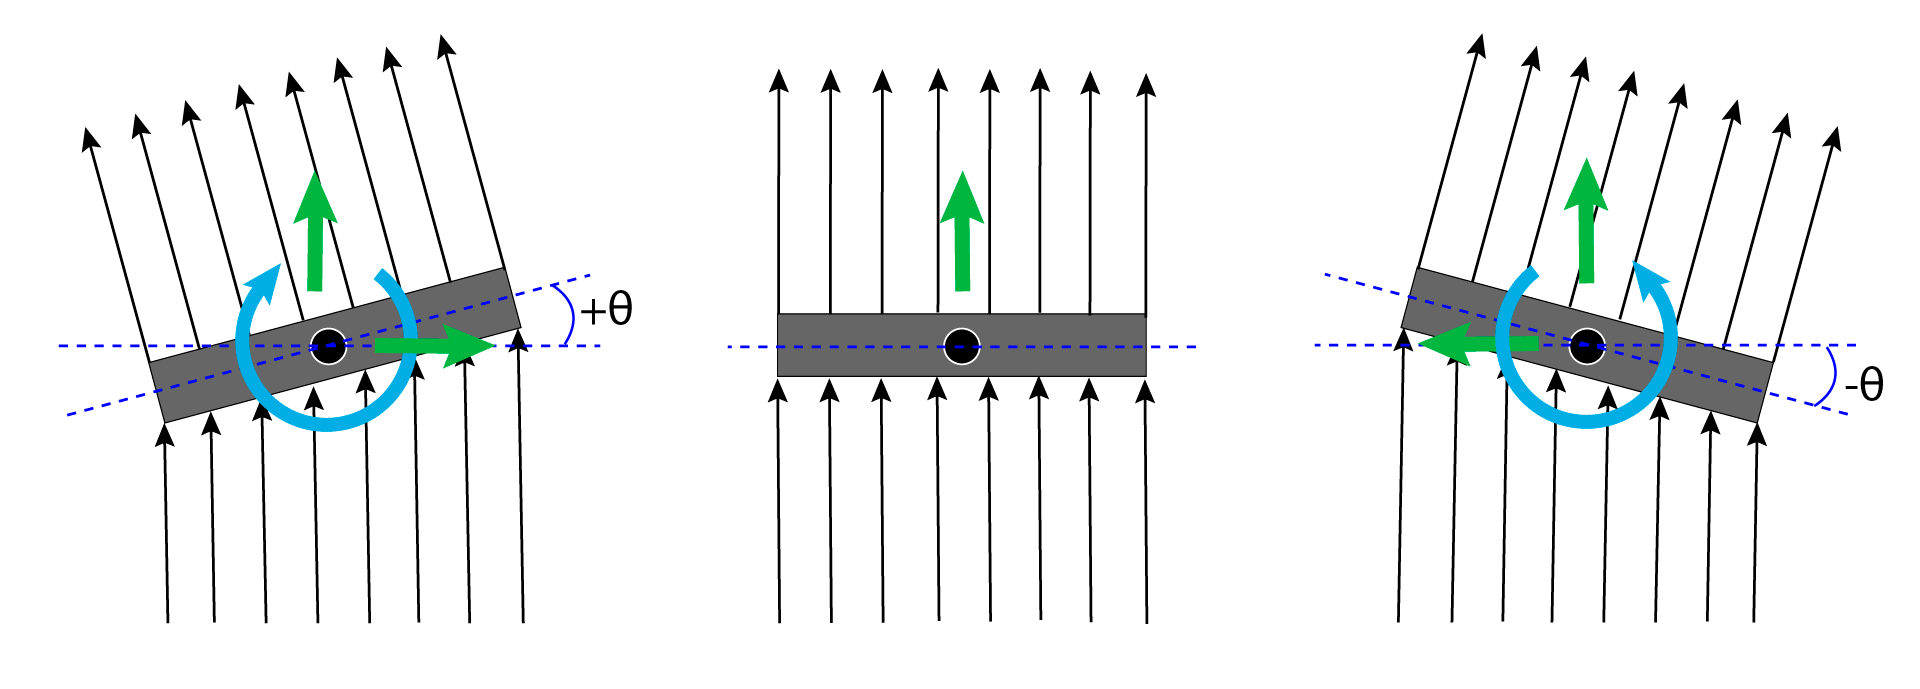 <small><strong>Figure 6:</strong> Aerodynamic forces and hinge moments on grid fins. External forces and torques result from the deflection of the air flow. Credit: <em>Alexandre Cortiella</em> </small>